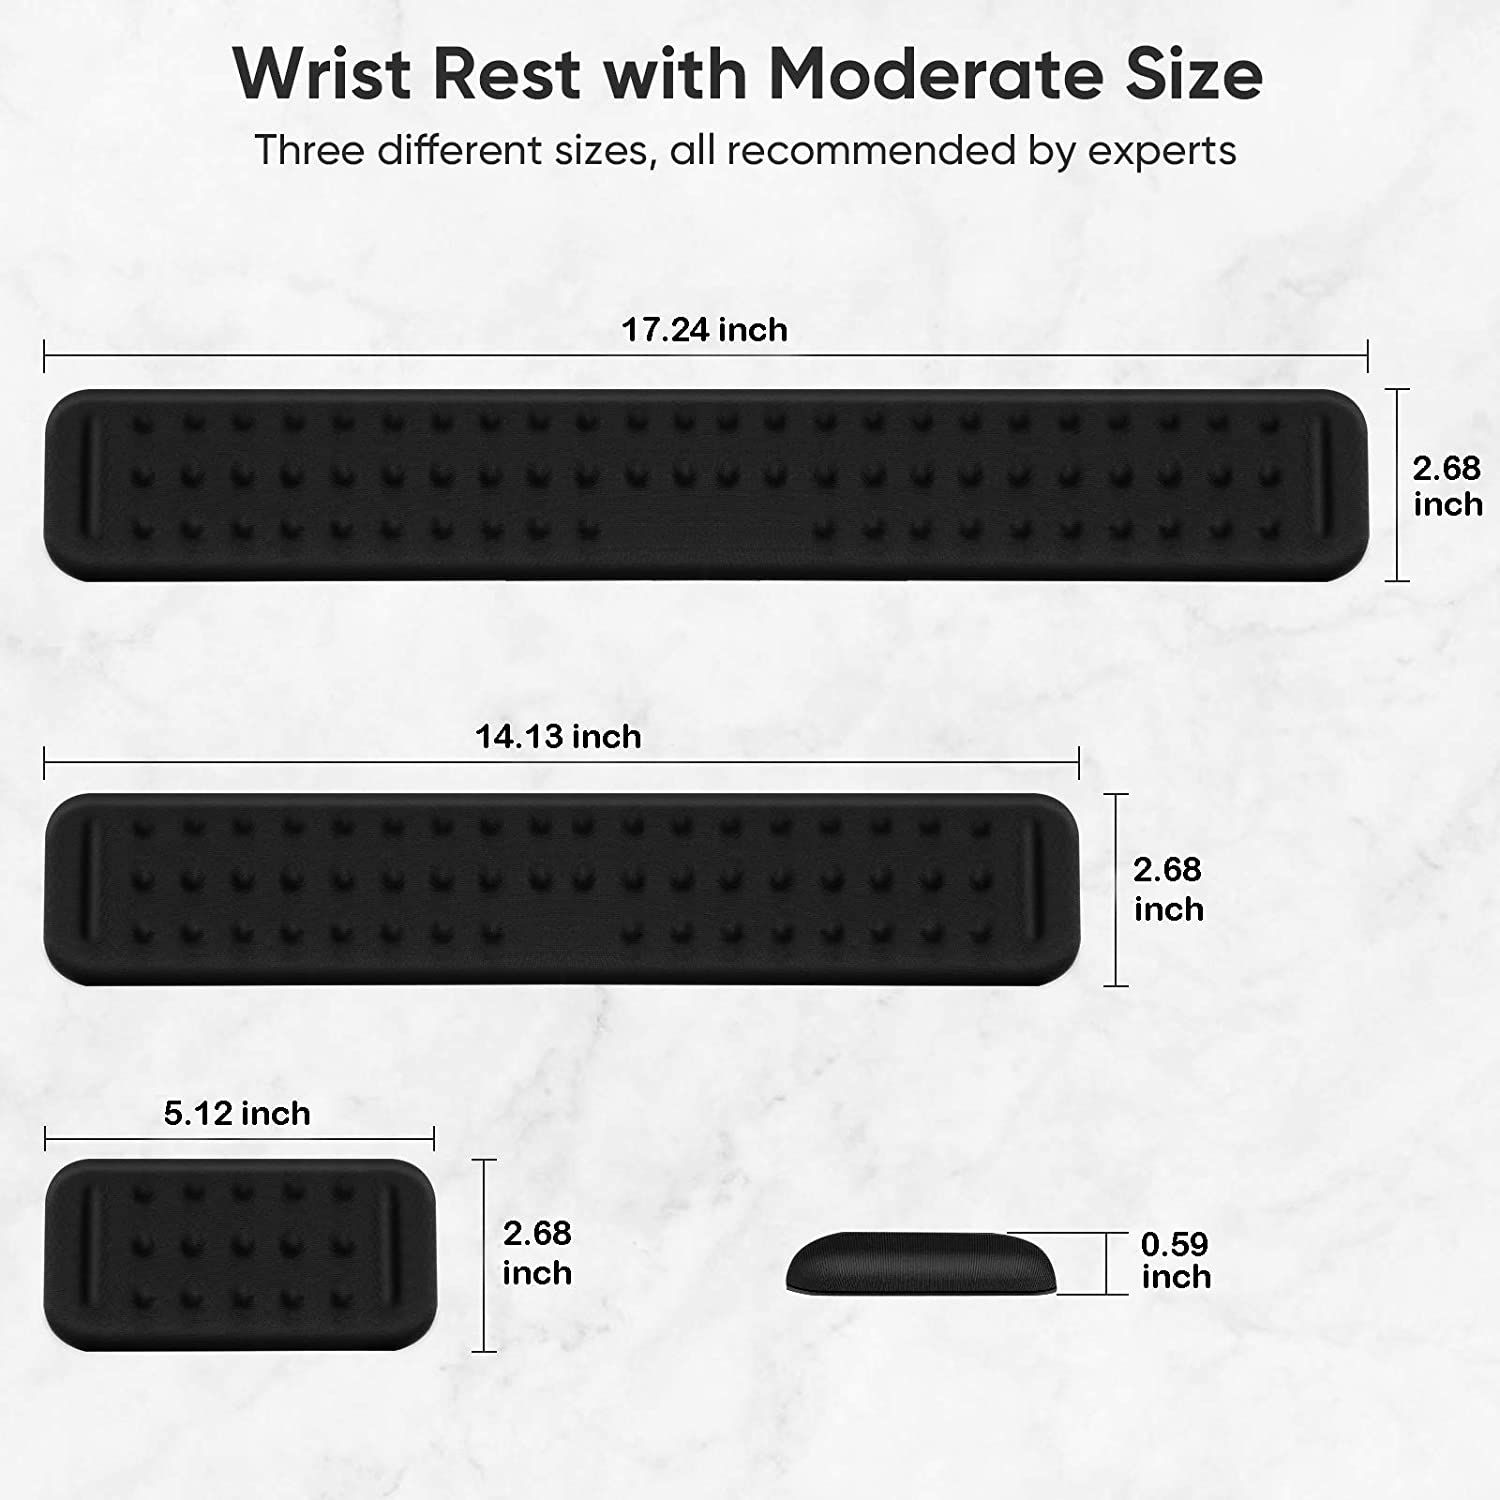 Varying sizes of a Jedia wrist rest.